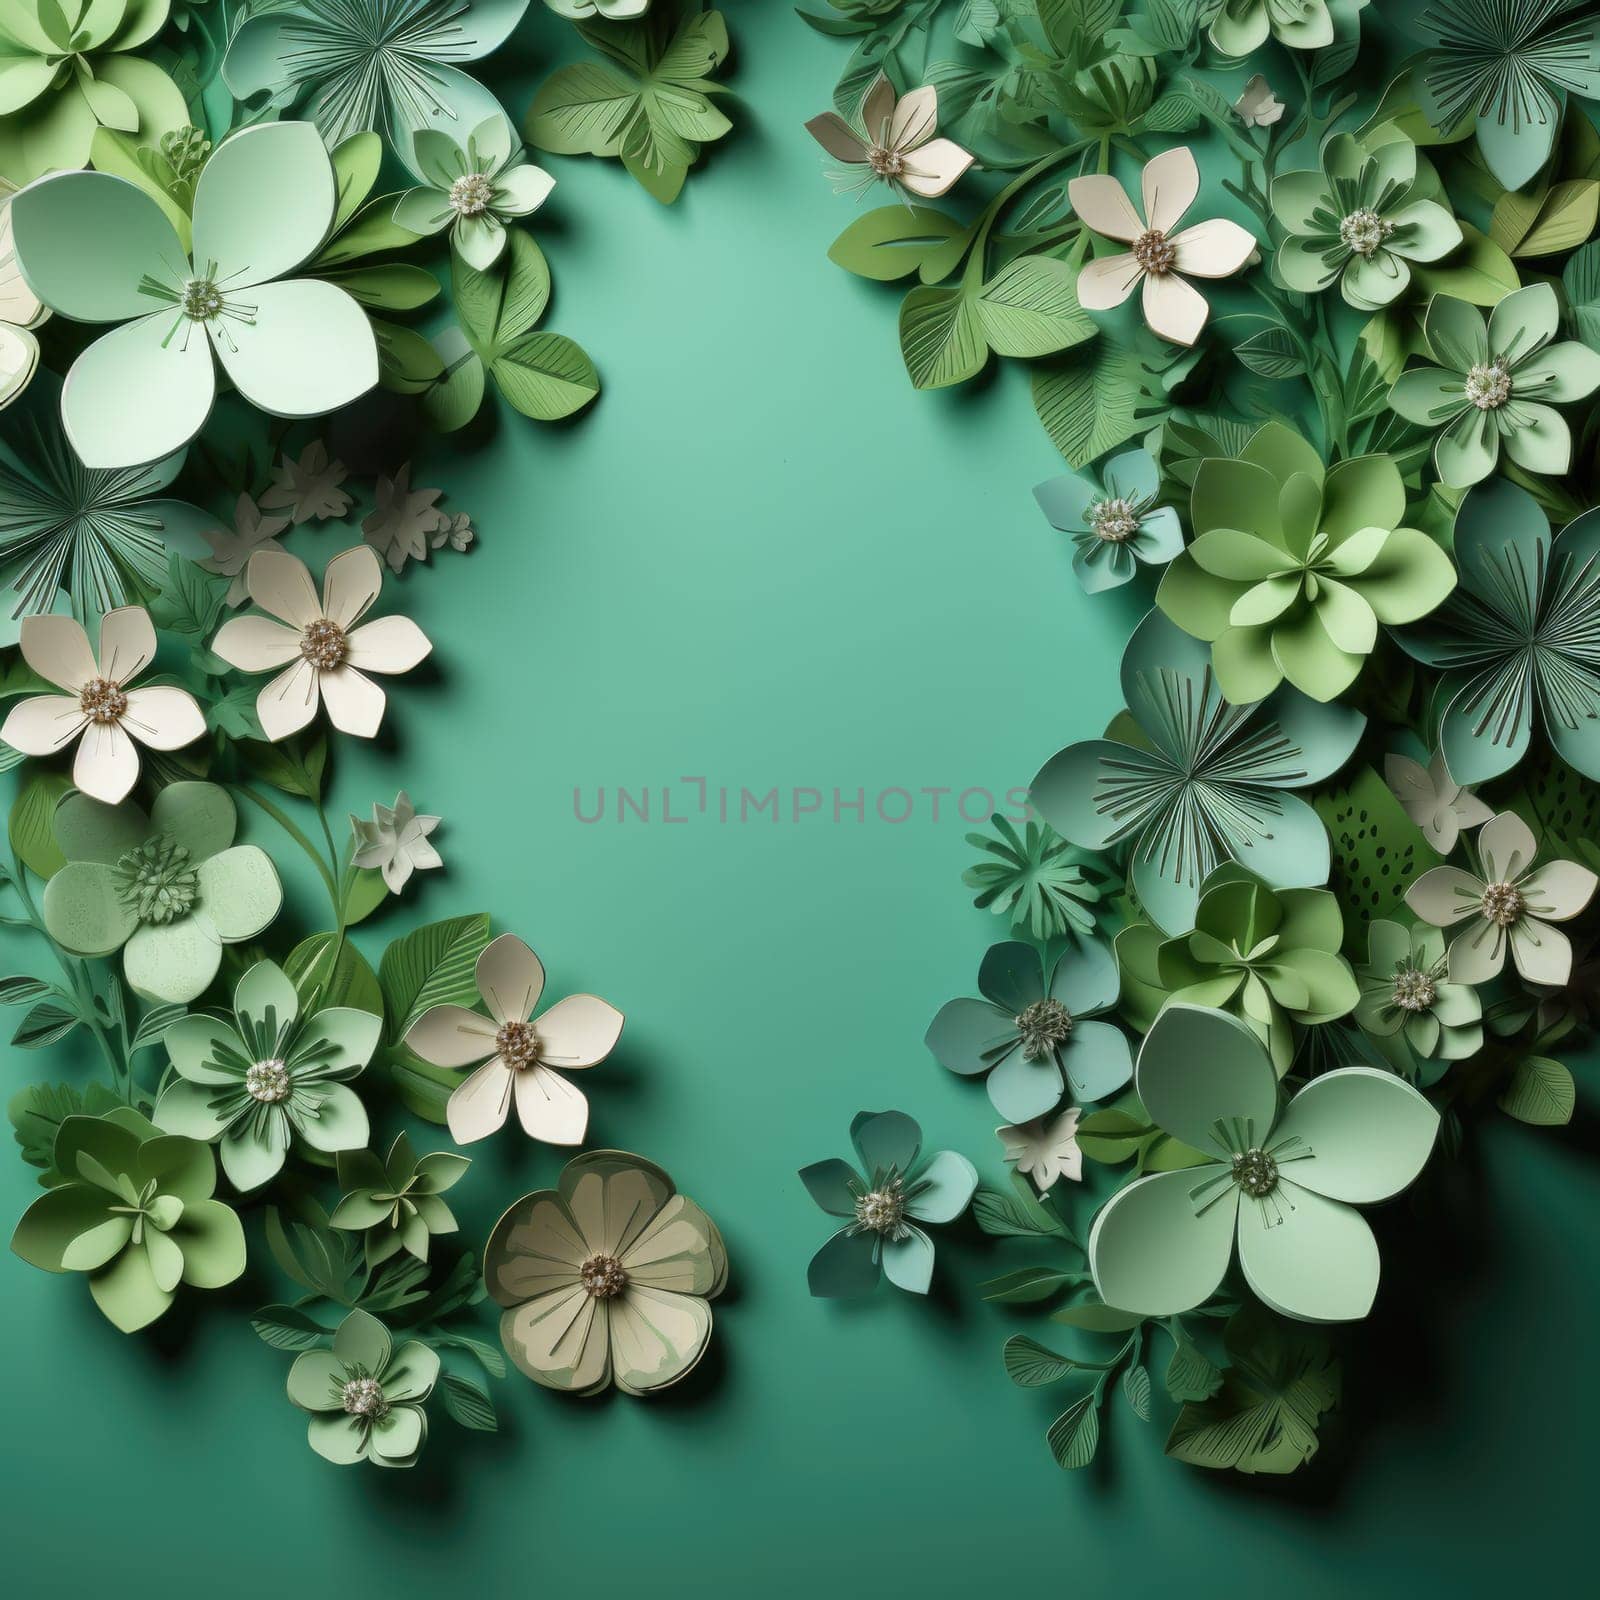 Paper flowers in various colors arranged on a vibrant green background.